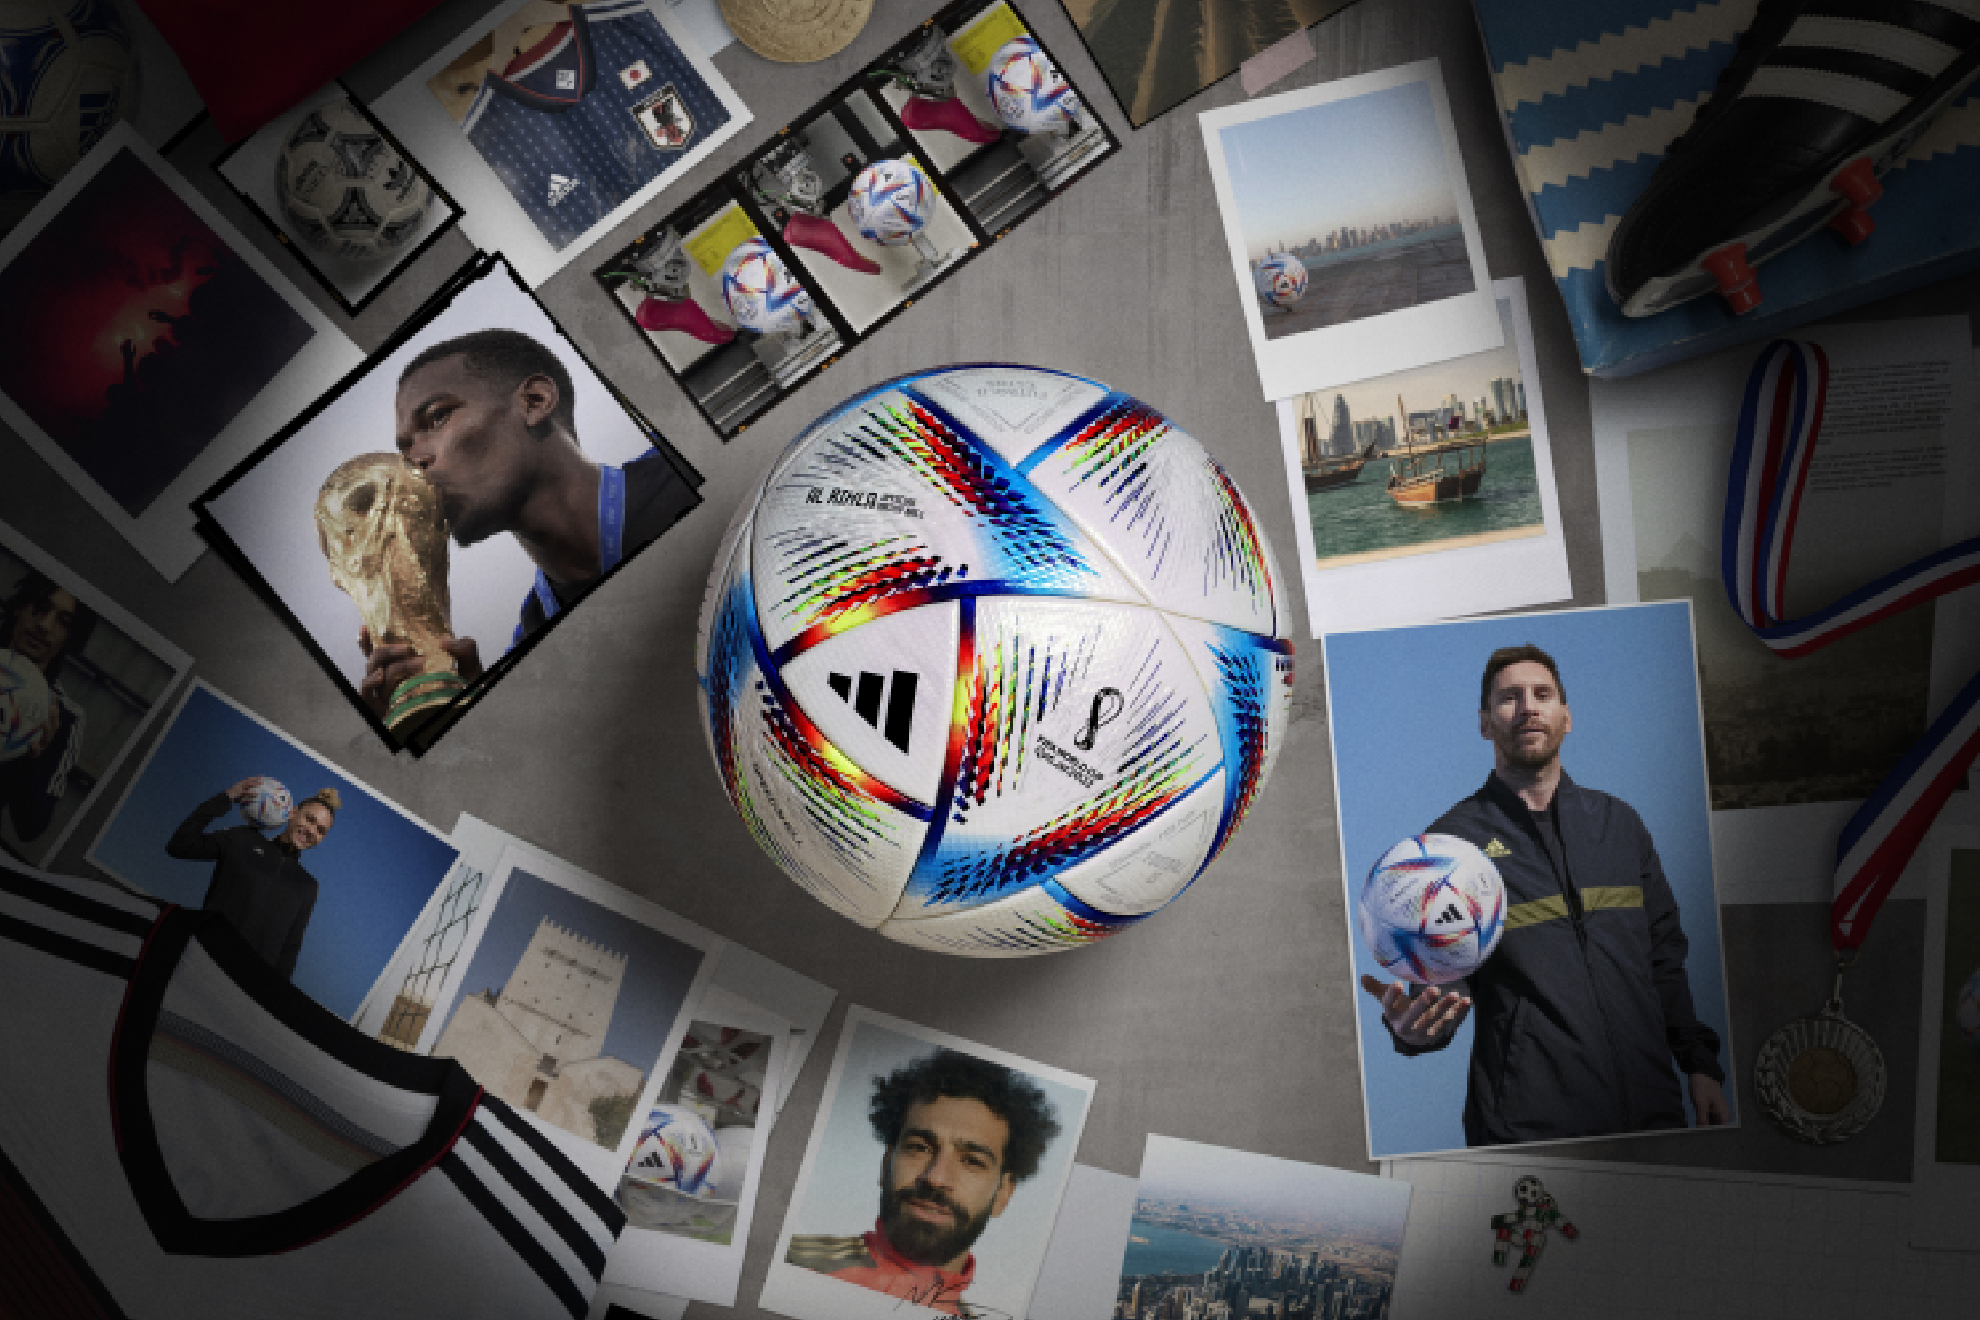 The World Cup's New High-Tech Ball Will Change Soccer Forever